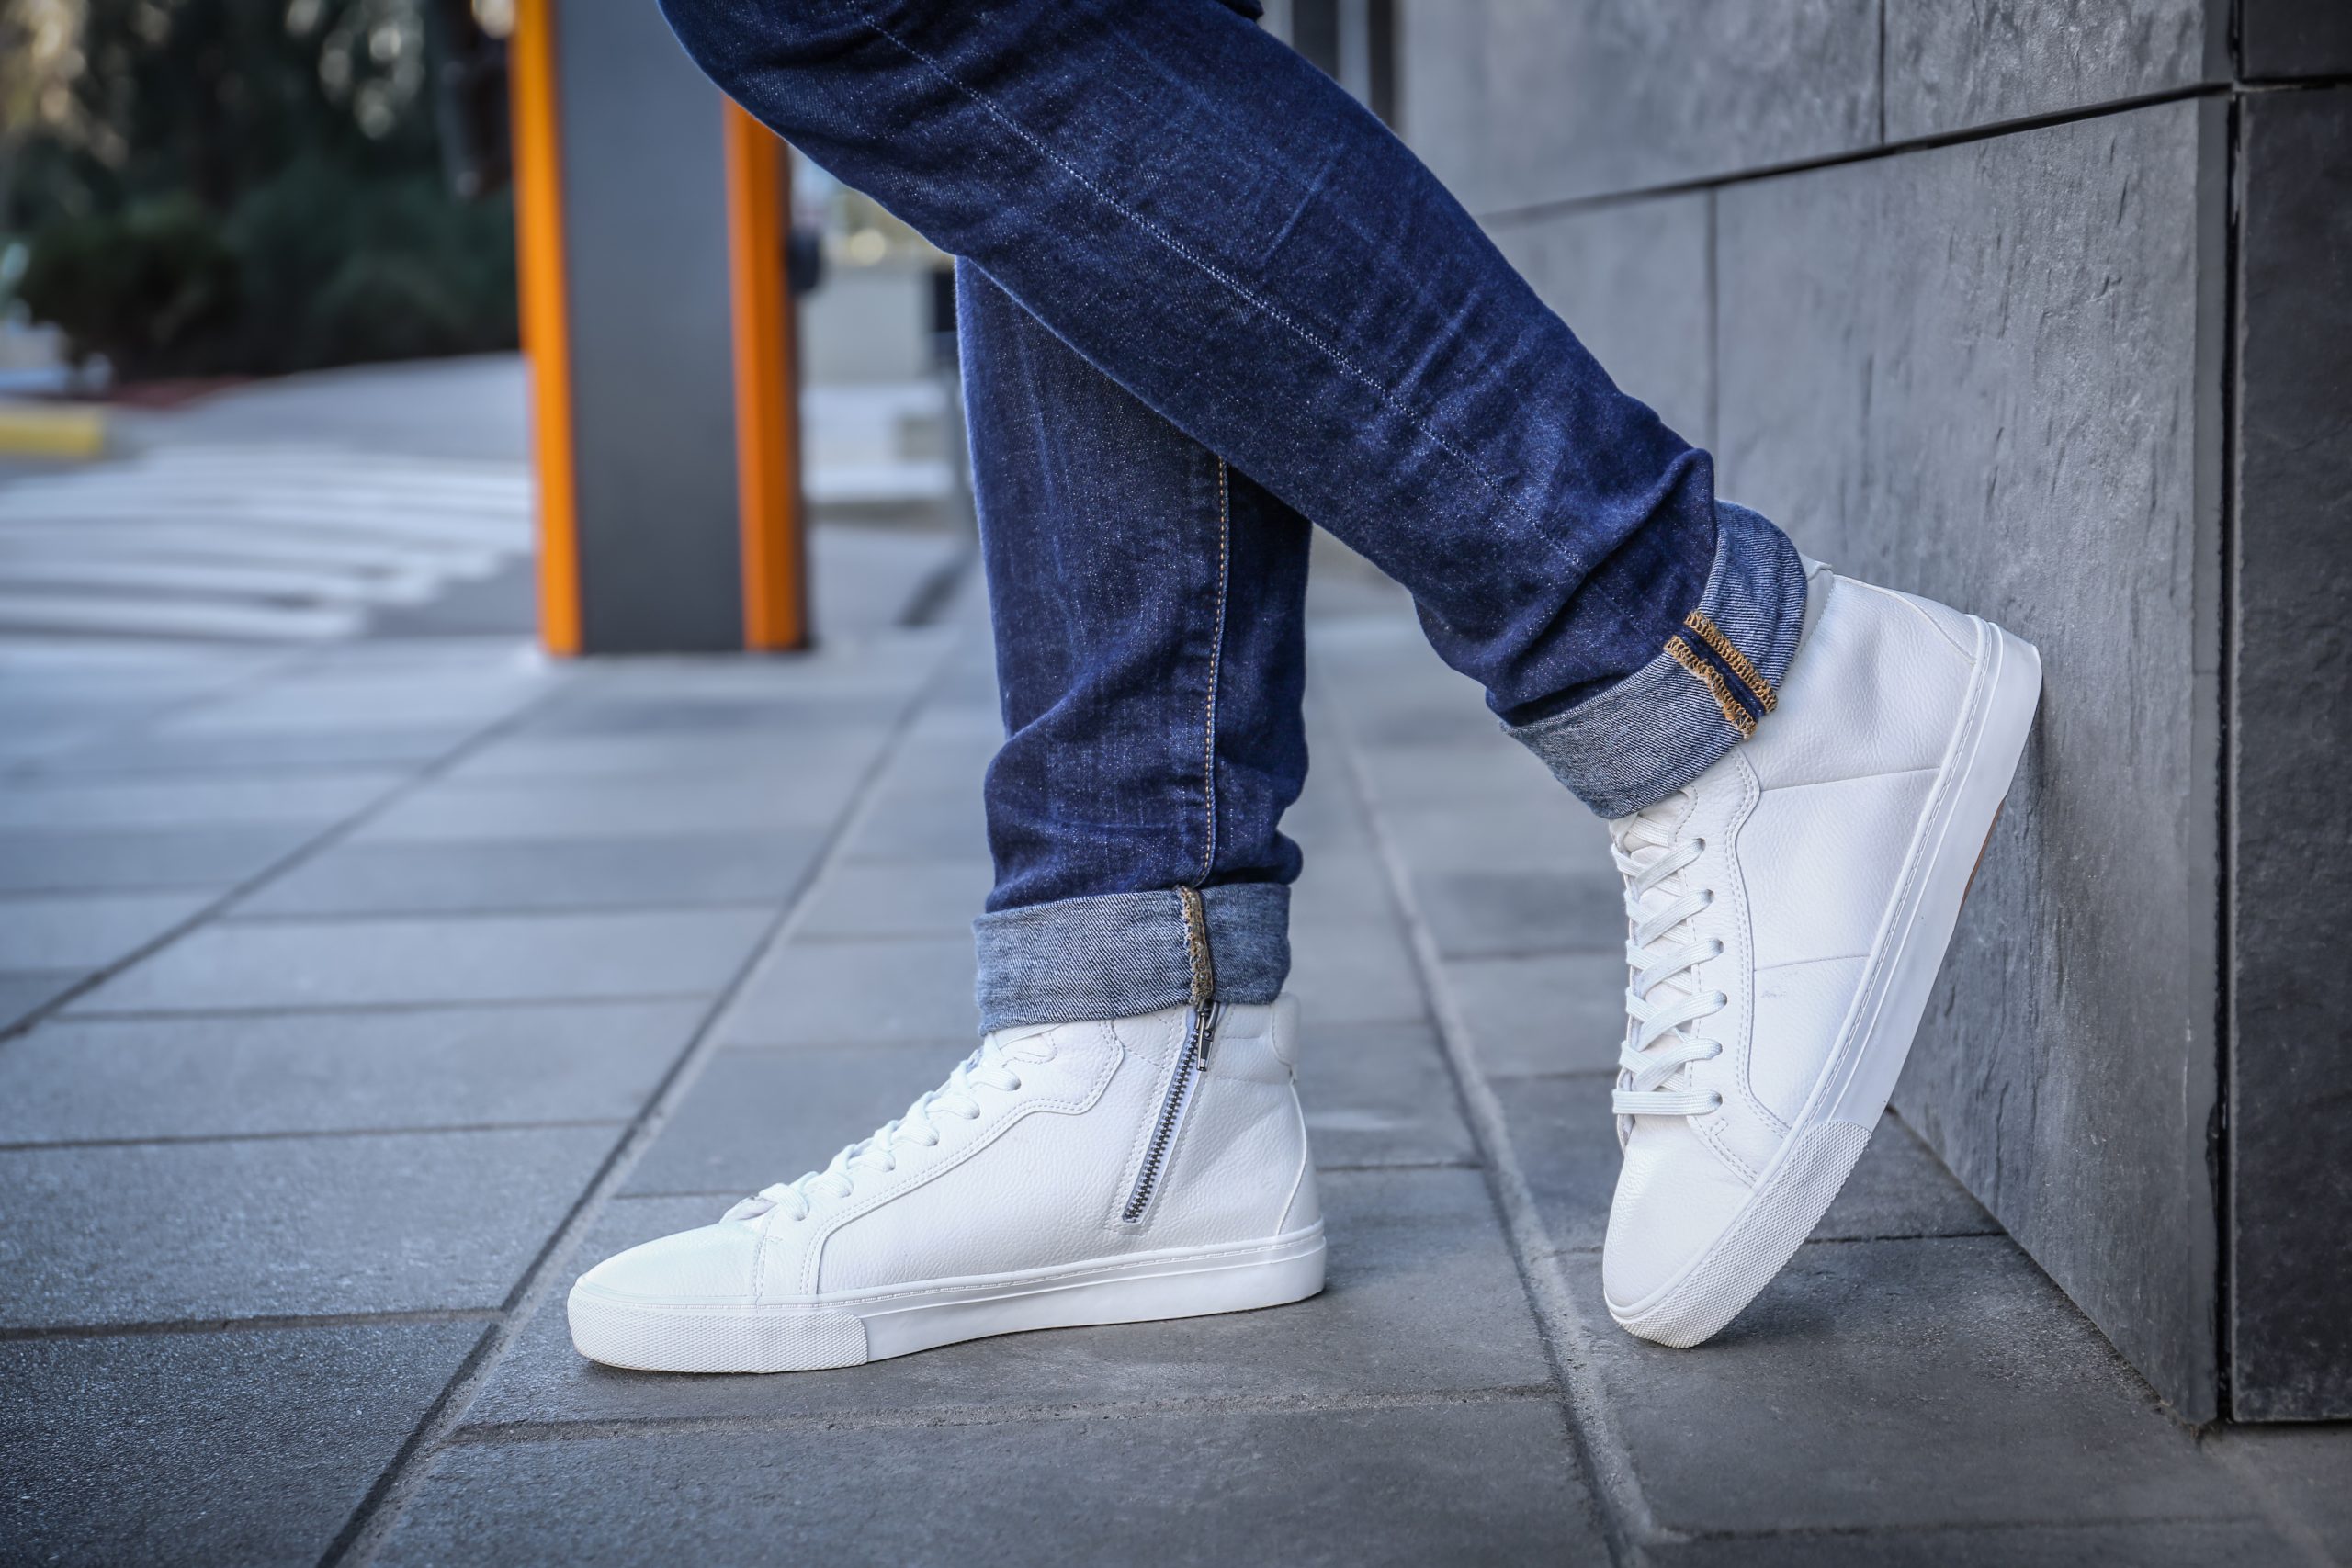 How to clean white shoes? Learn effective ways